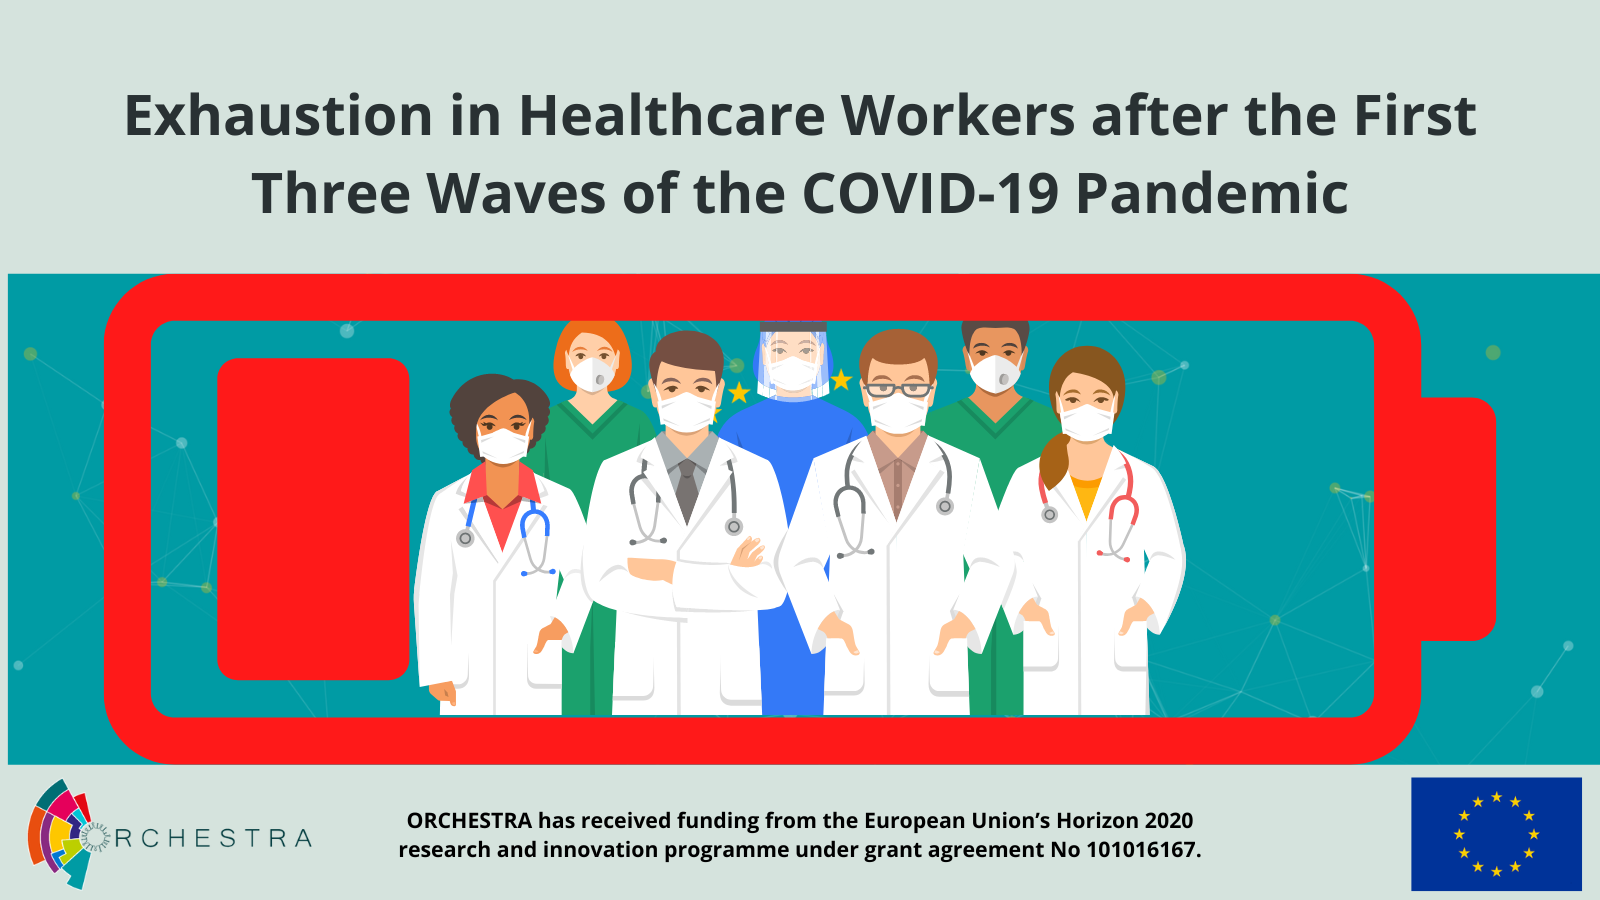 Exhaustion in Healthcare Workers after the First Three Waves of the COVID-19 Pandemic